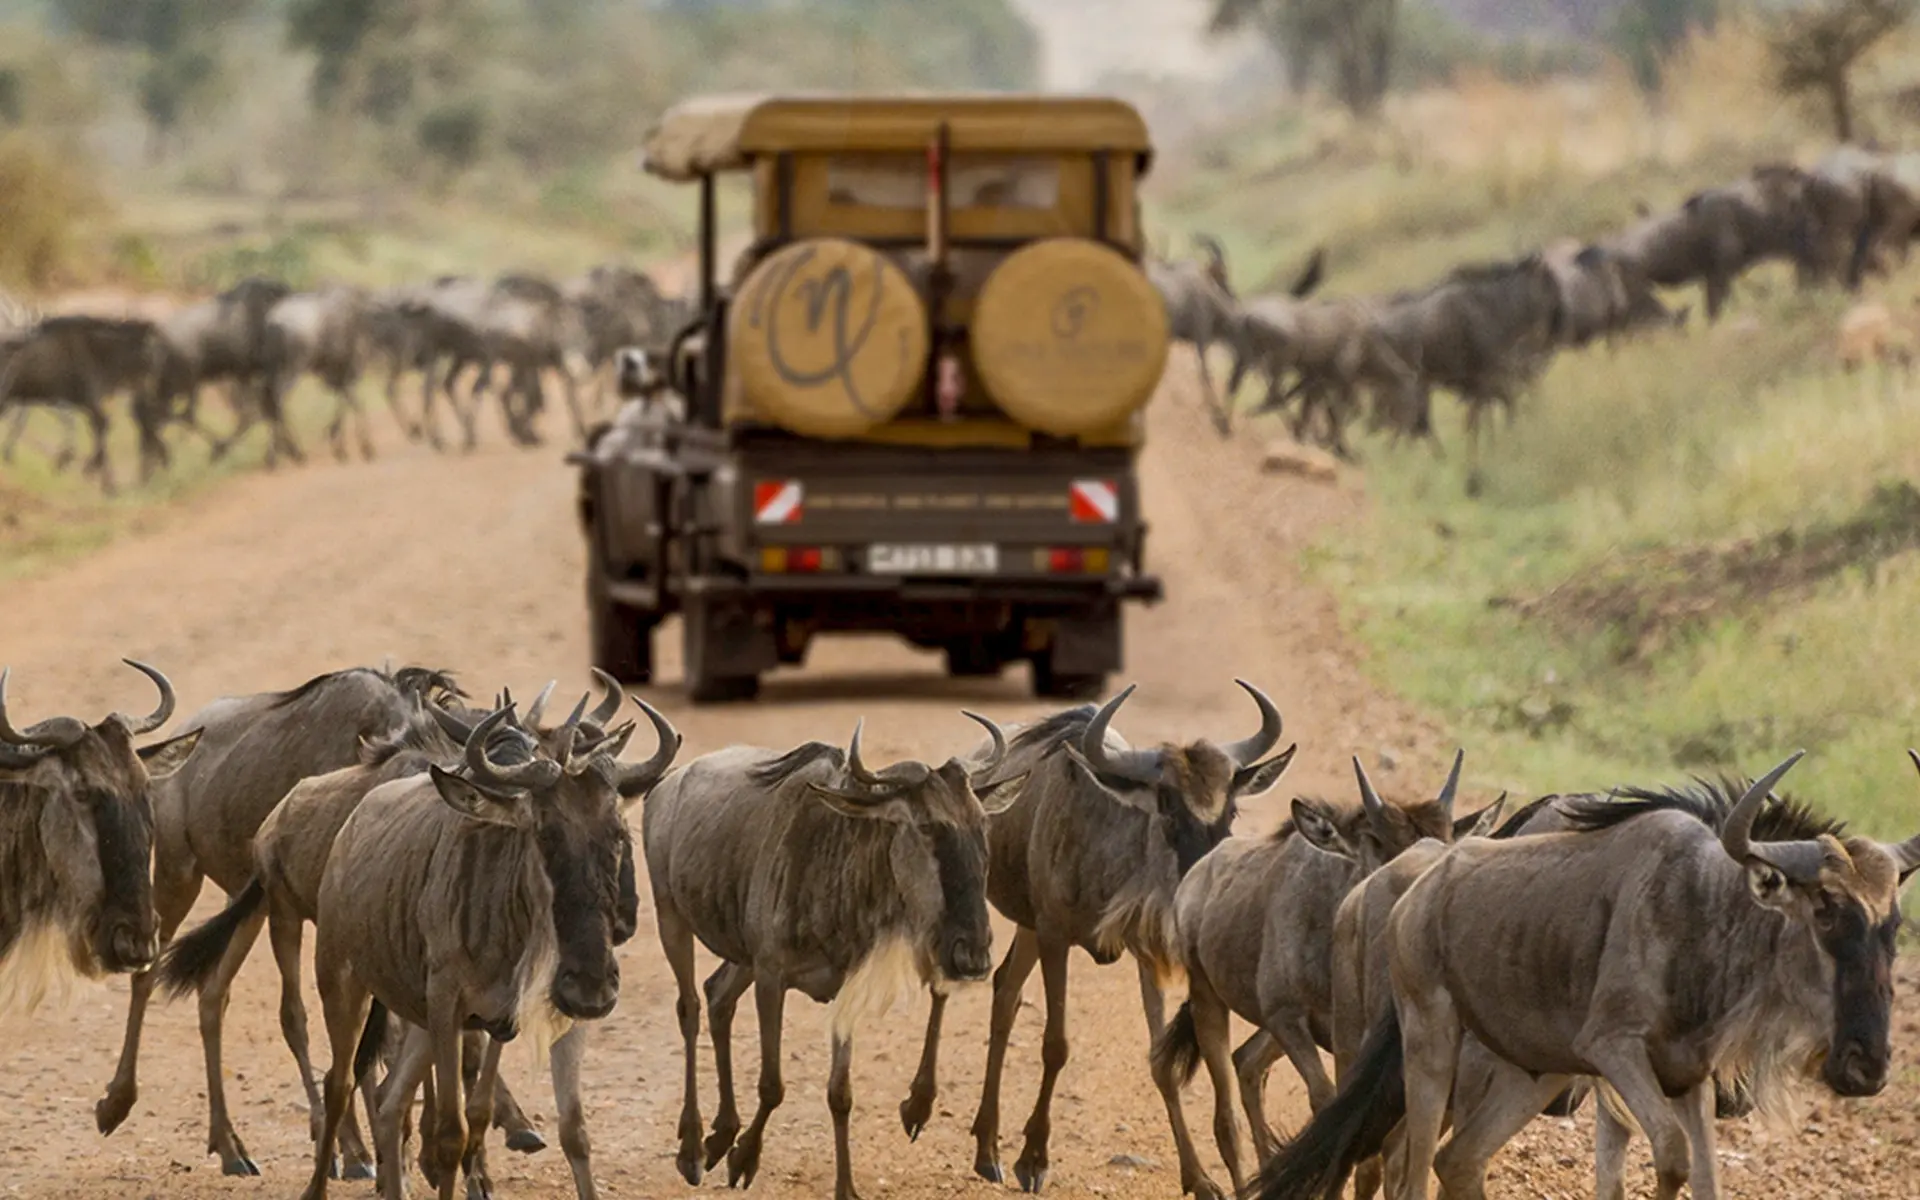 Safari Game Drive Vehicle surrounded by Wildebeests on the great migration in the Serengeti.